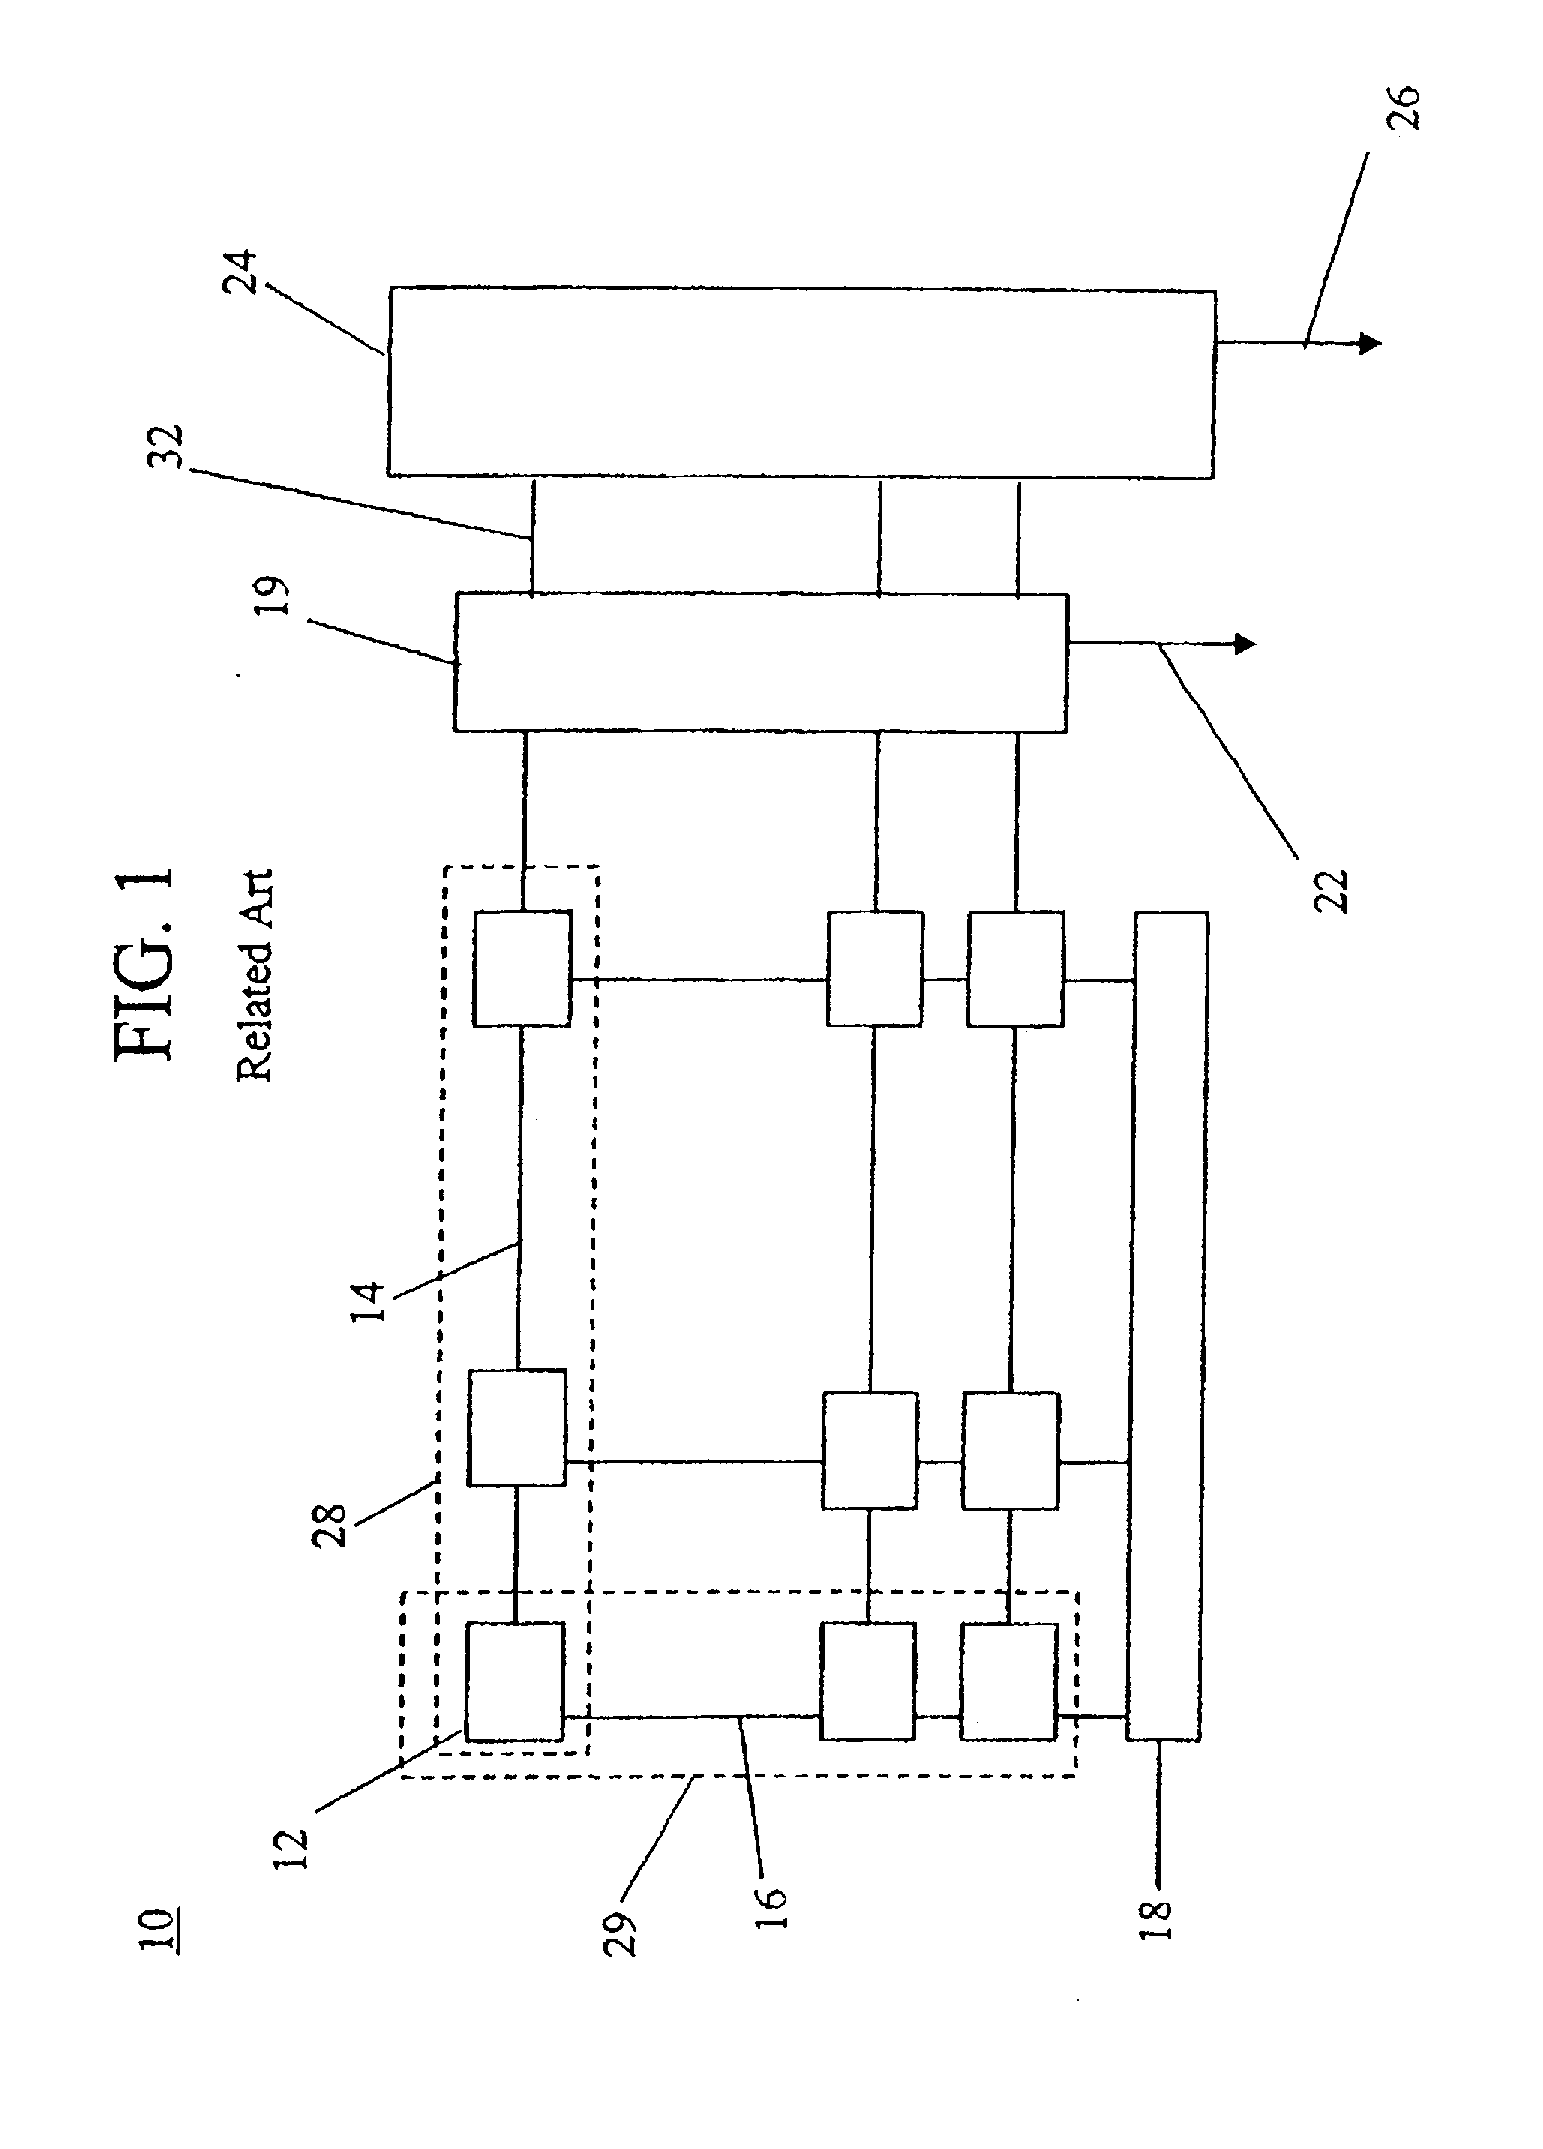 Design structure for content addressable memory